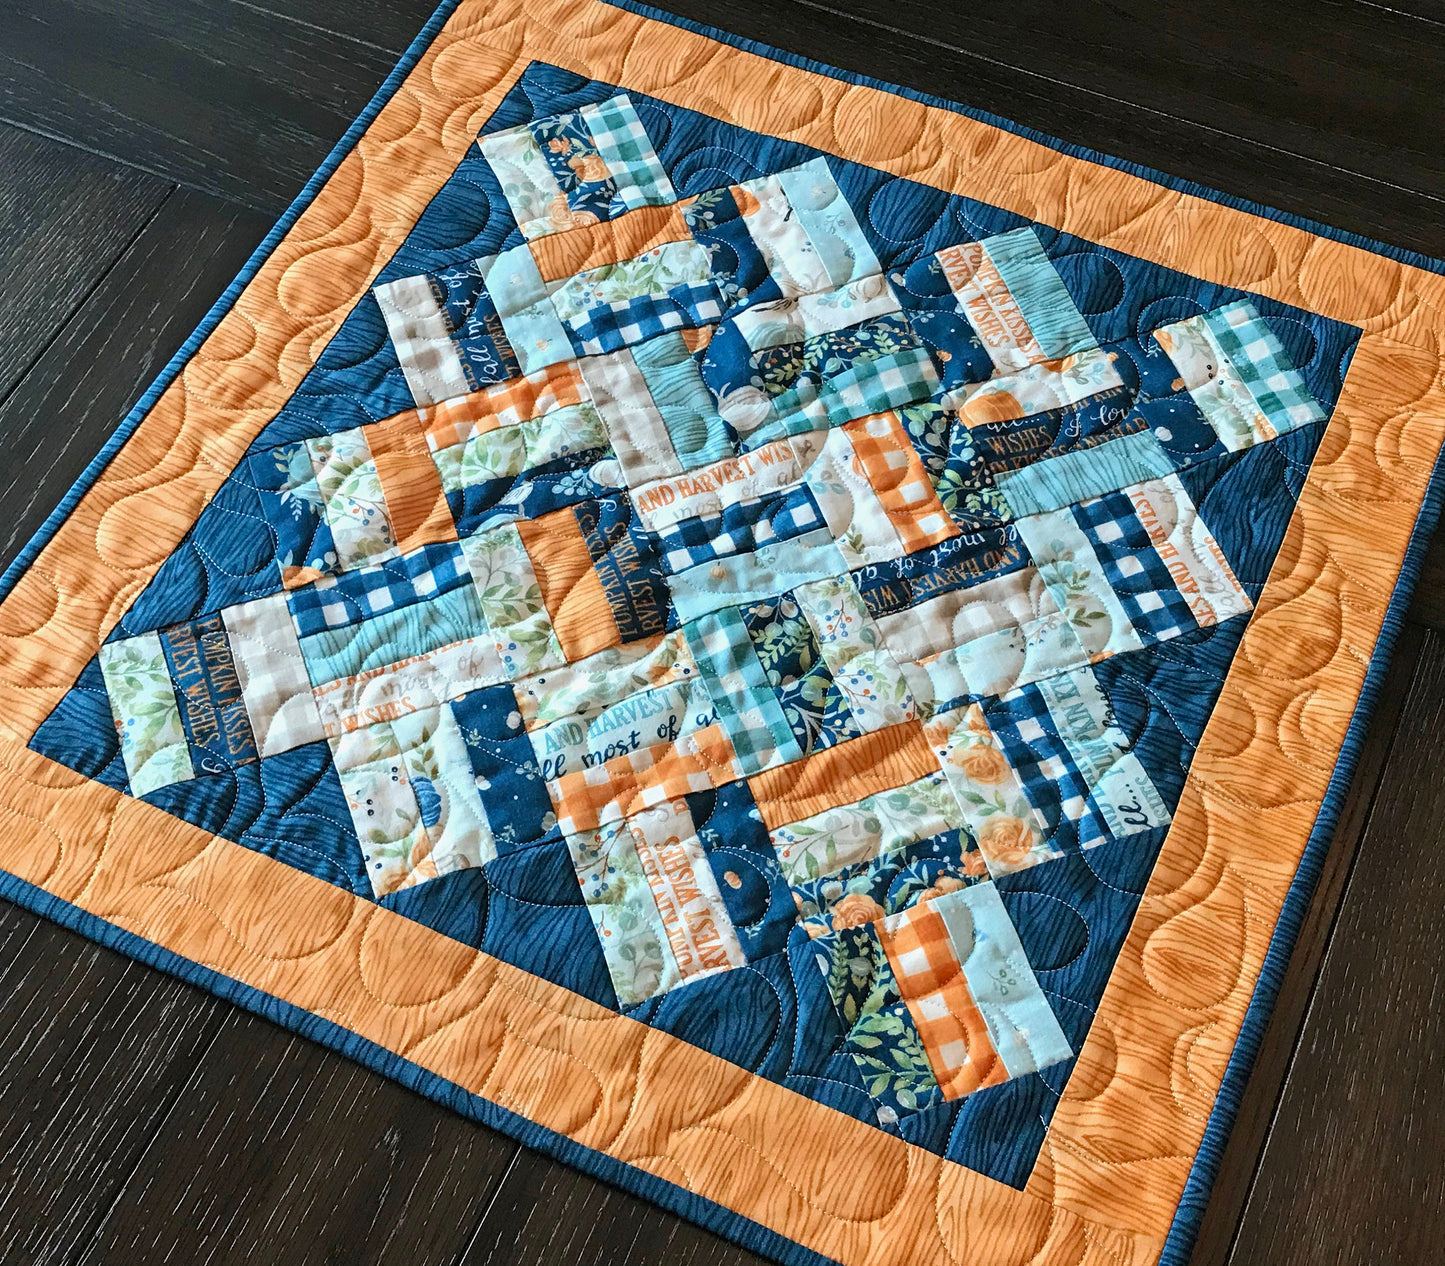 Braided Squares table runner and topper pattern. Sample runner and topper shown with a fall color scheme of dark blue, aqua, cream and orange.